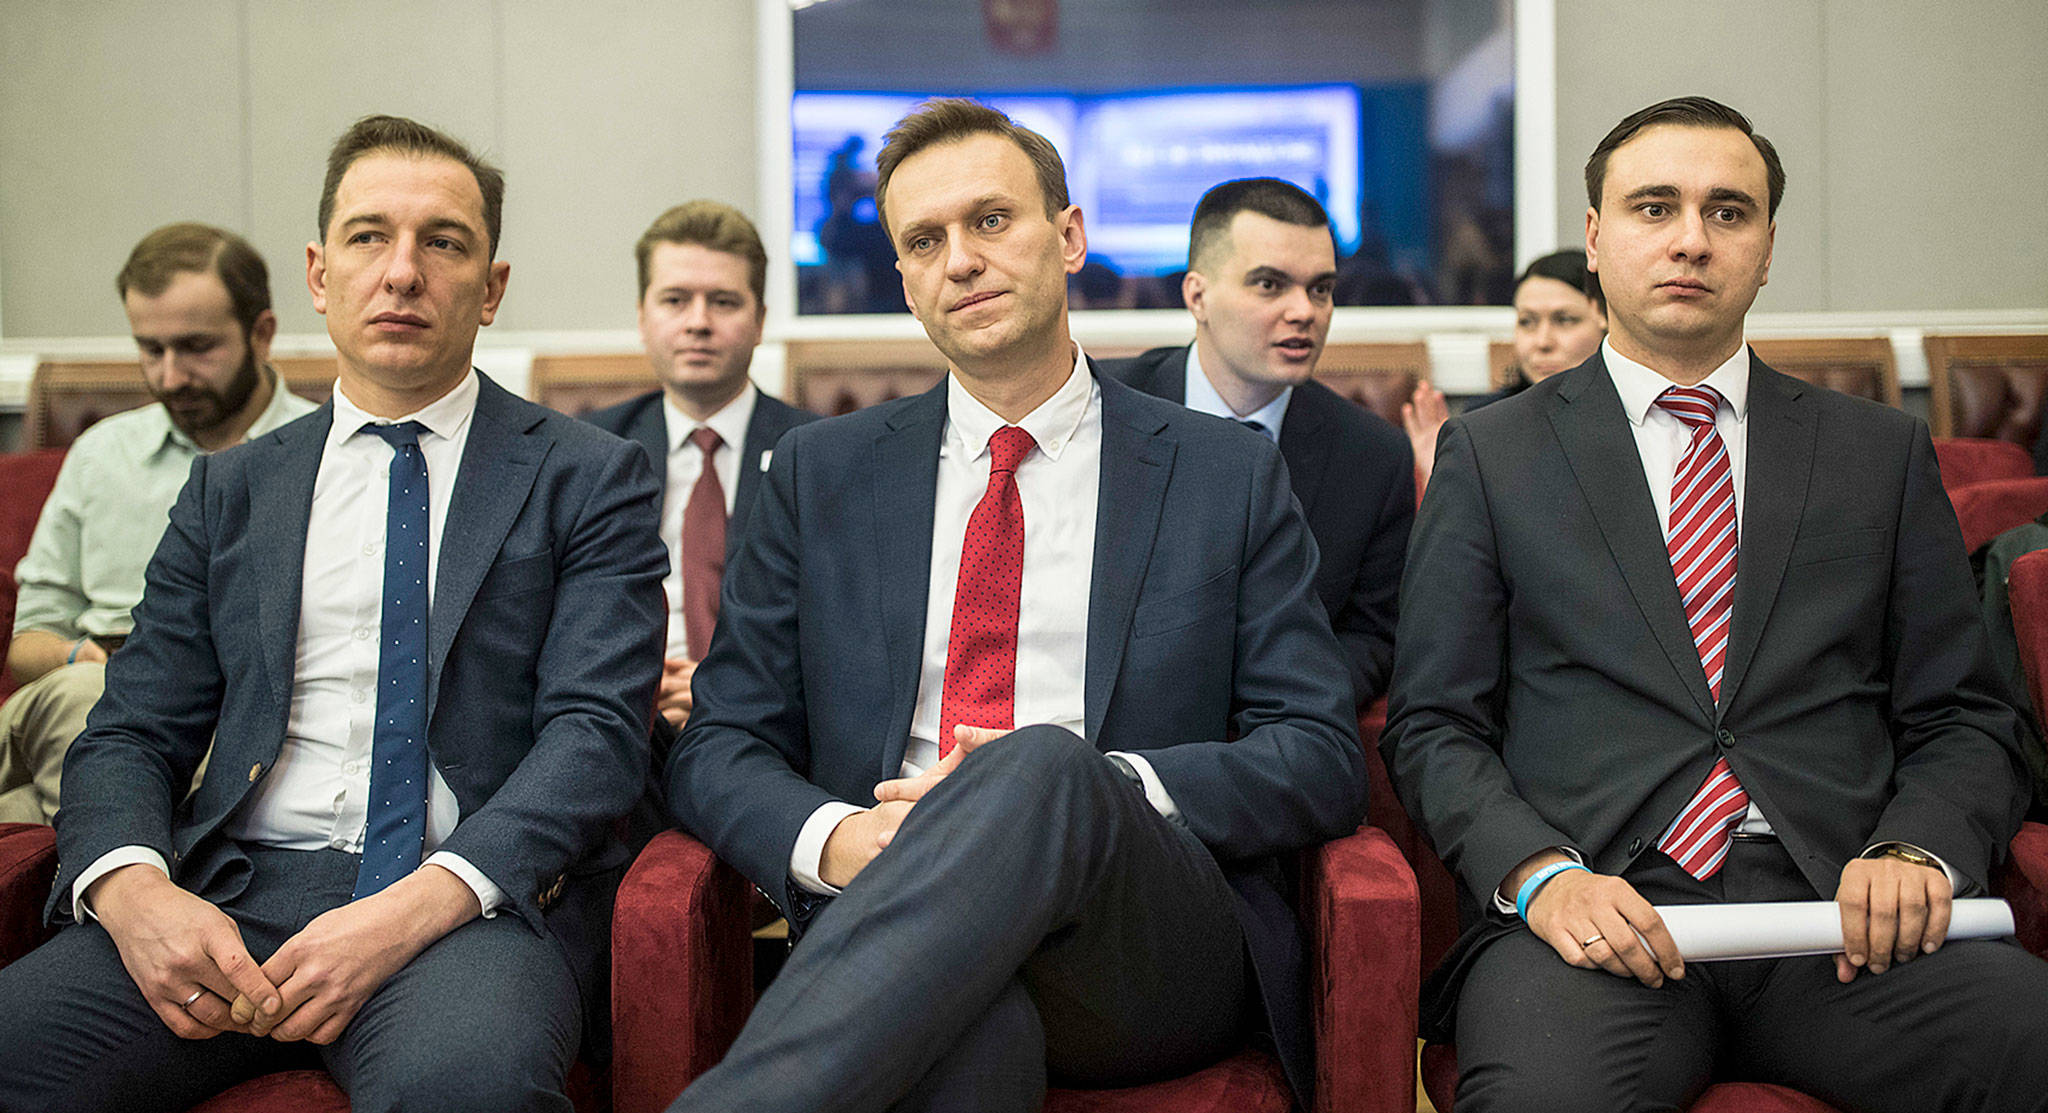 Russian opposition leader Alexei Navalny (center), who submitted endorsement papers necessary for his registration as a presidential candidate, sits at the Central Election Commission in Moscow on Monday, awaiting a ruling whether to run for president. (Evgeny Feldman/Navalny Campaign via AP)